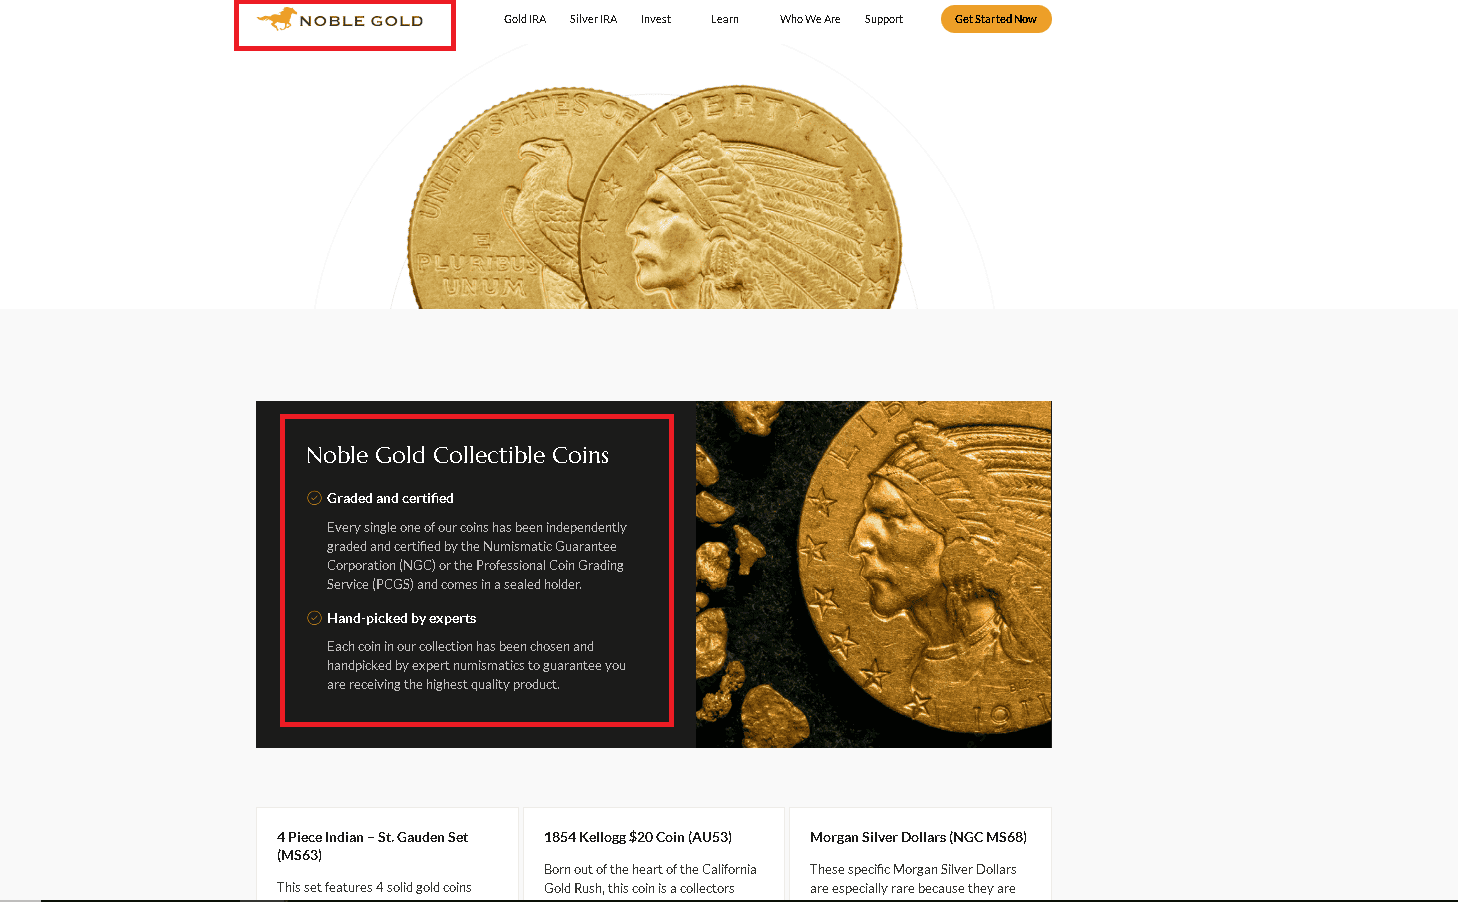 Noble Gold Investments sell numismatic coins